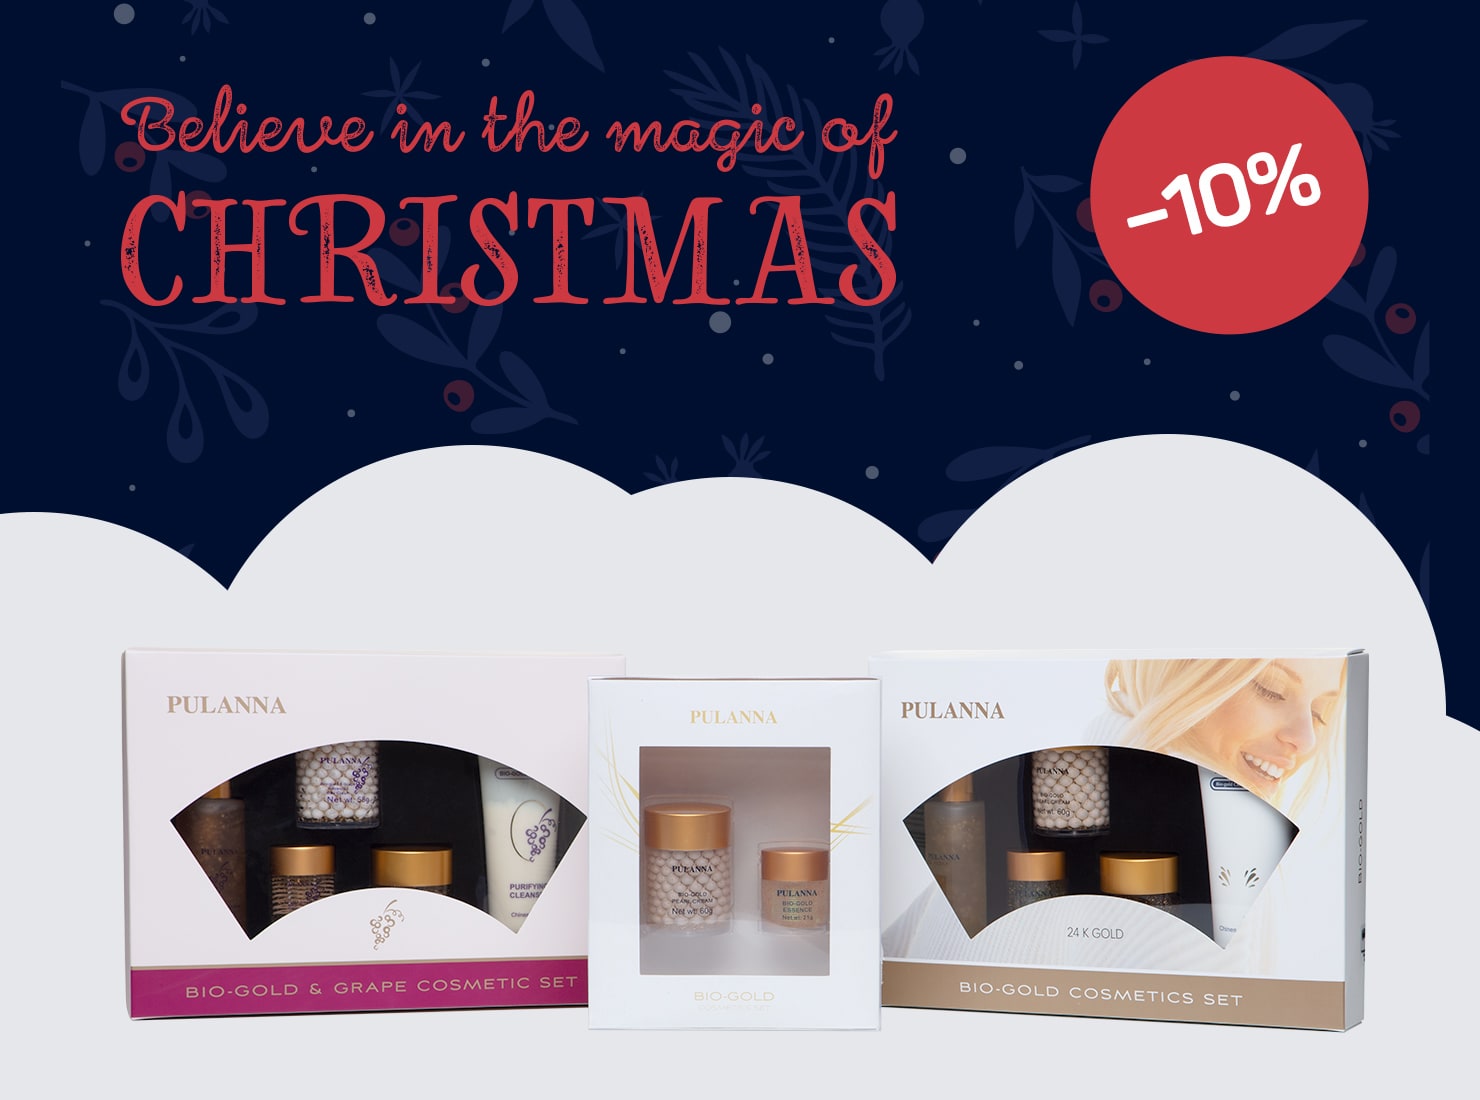 A good idea for a gift – gift sets 10% off. Pack a gift for free.